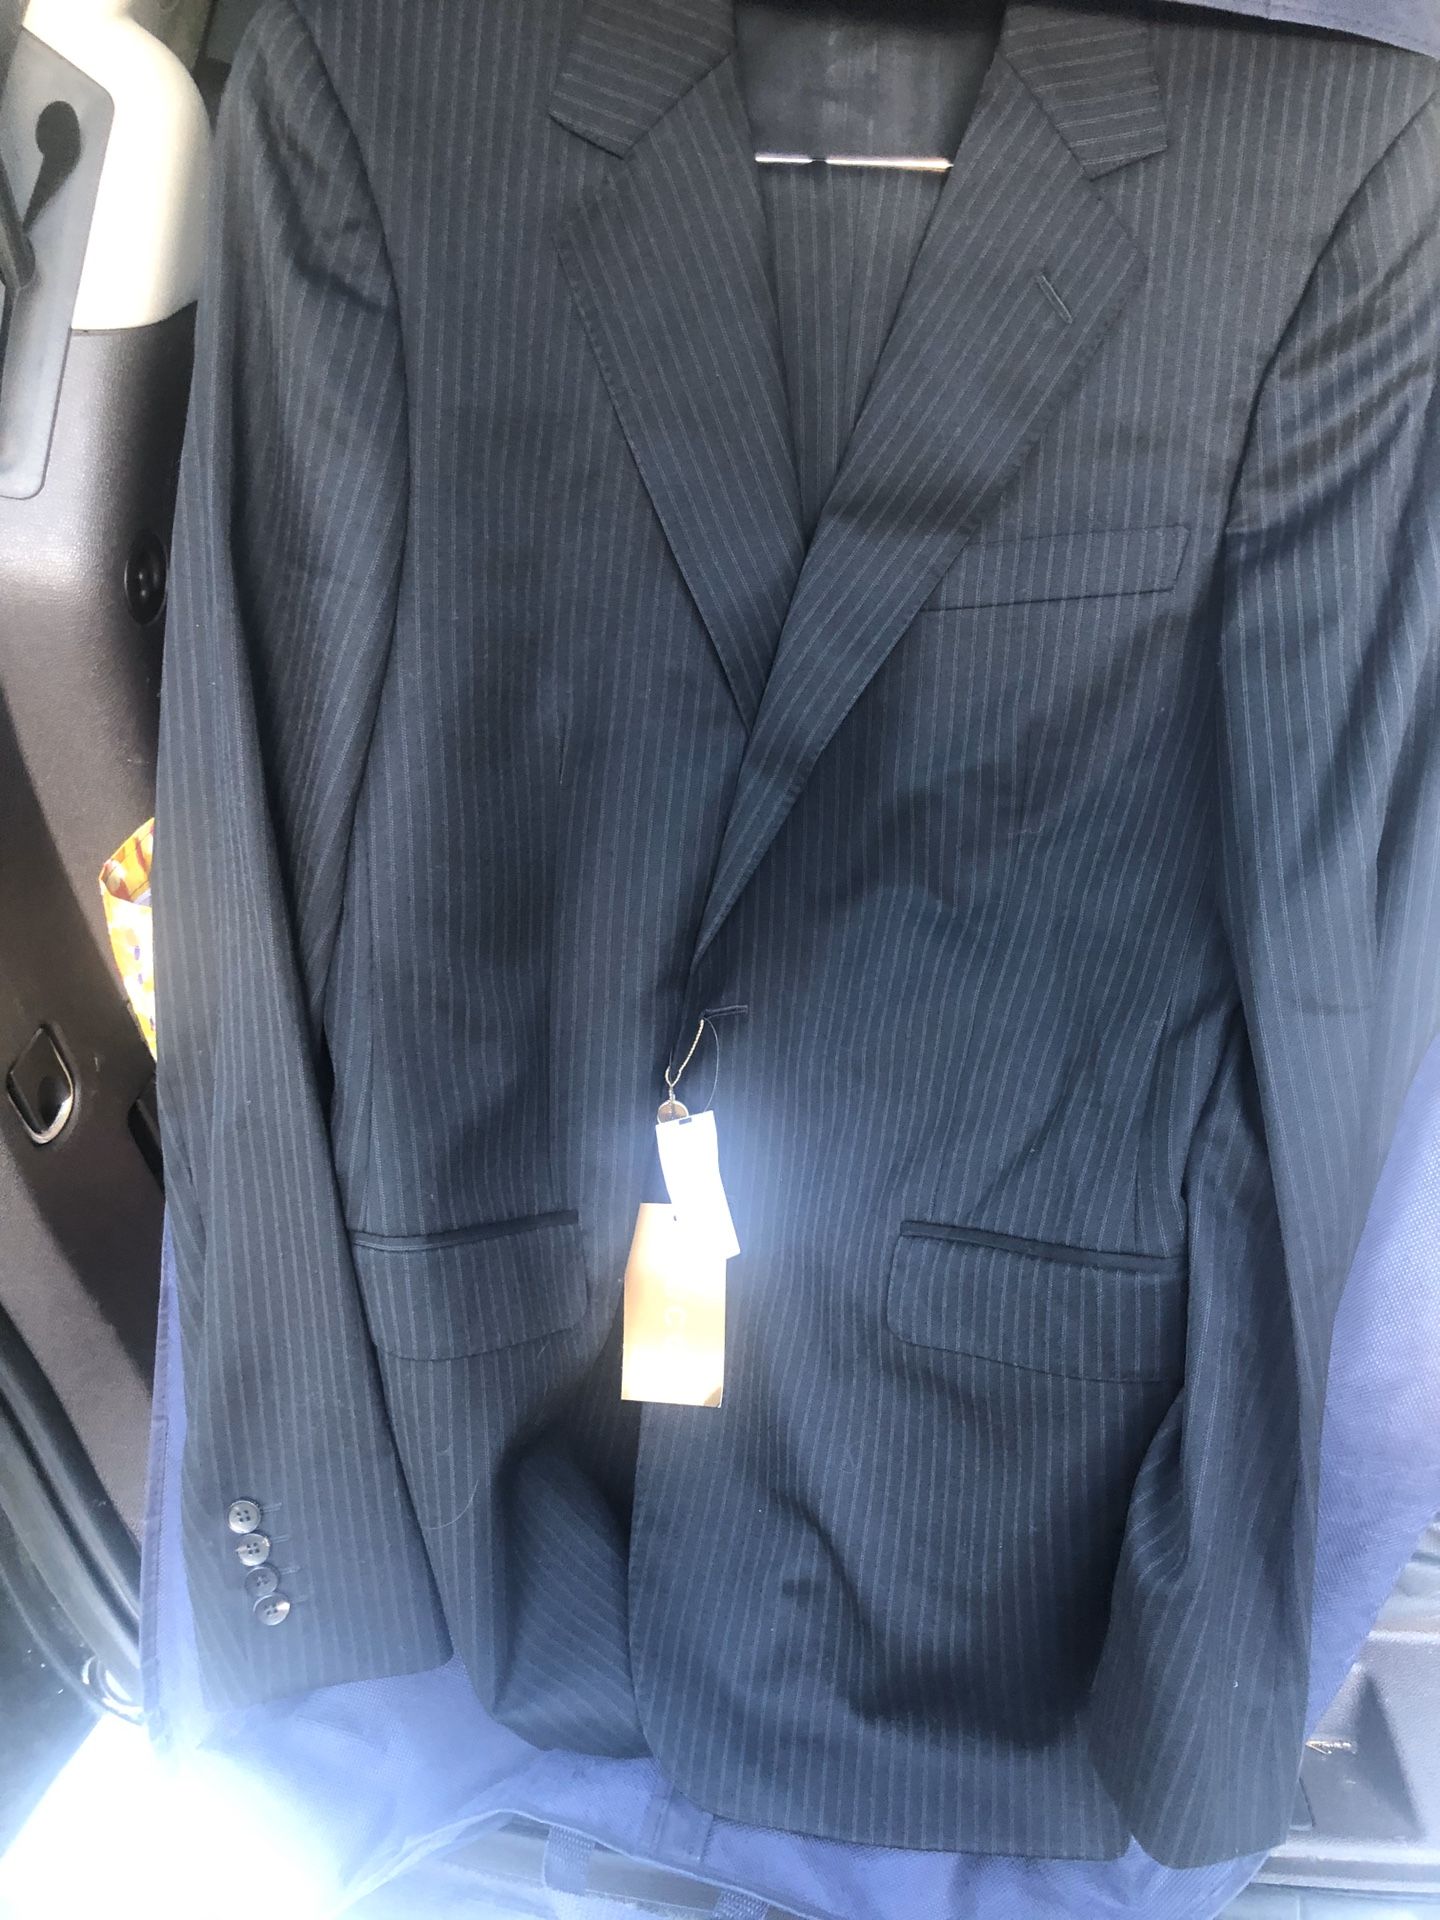 Brand New Gucci Suit with tags size 42-44